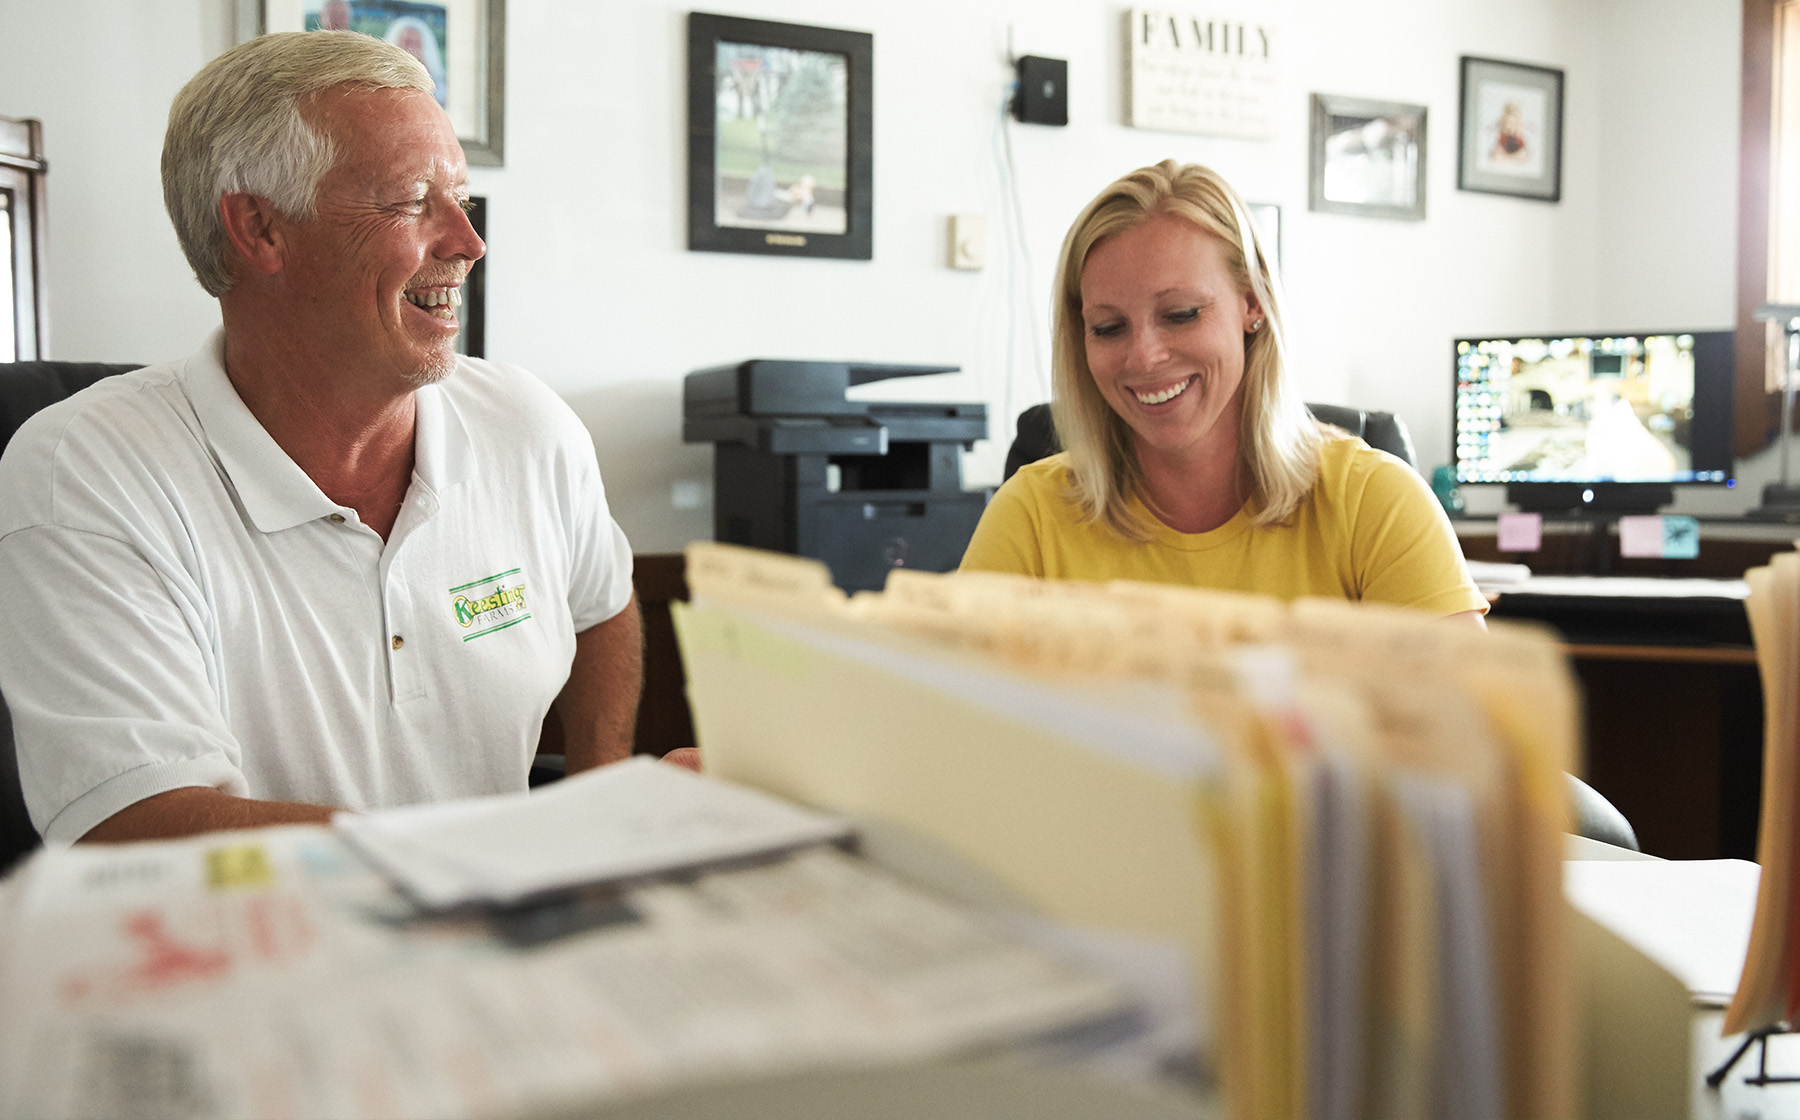 Image of Keesling Farms Growers for Red Gold Tomatoes David and daughter Kaycie in farm office